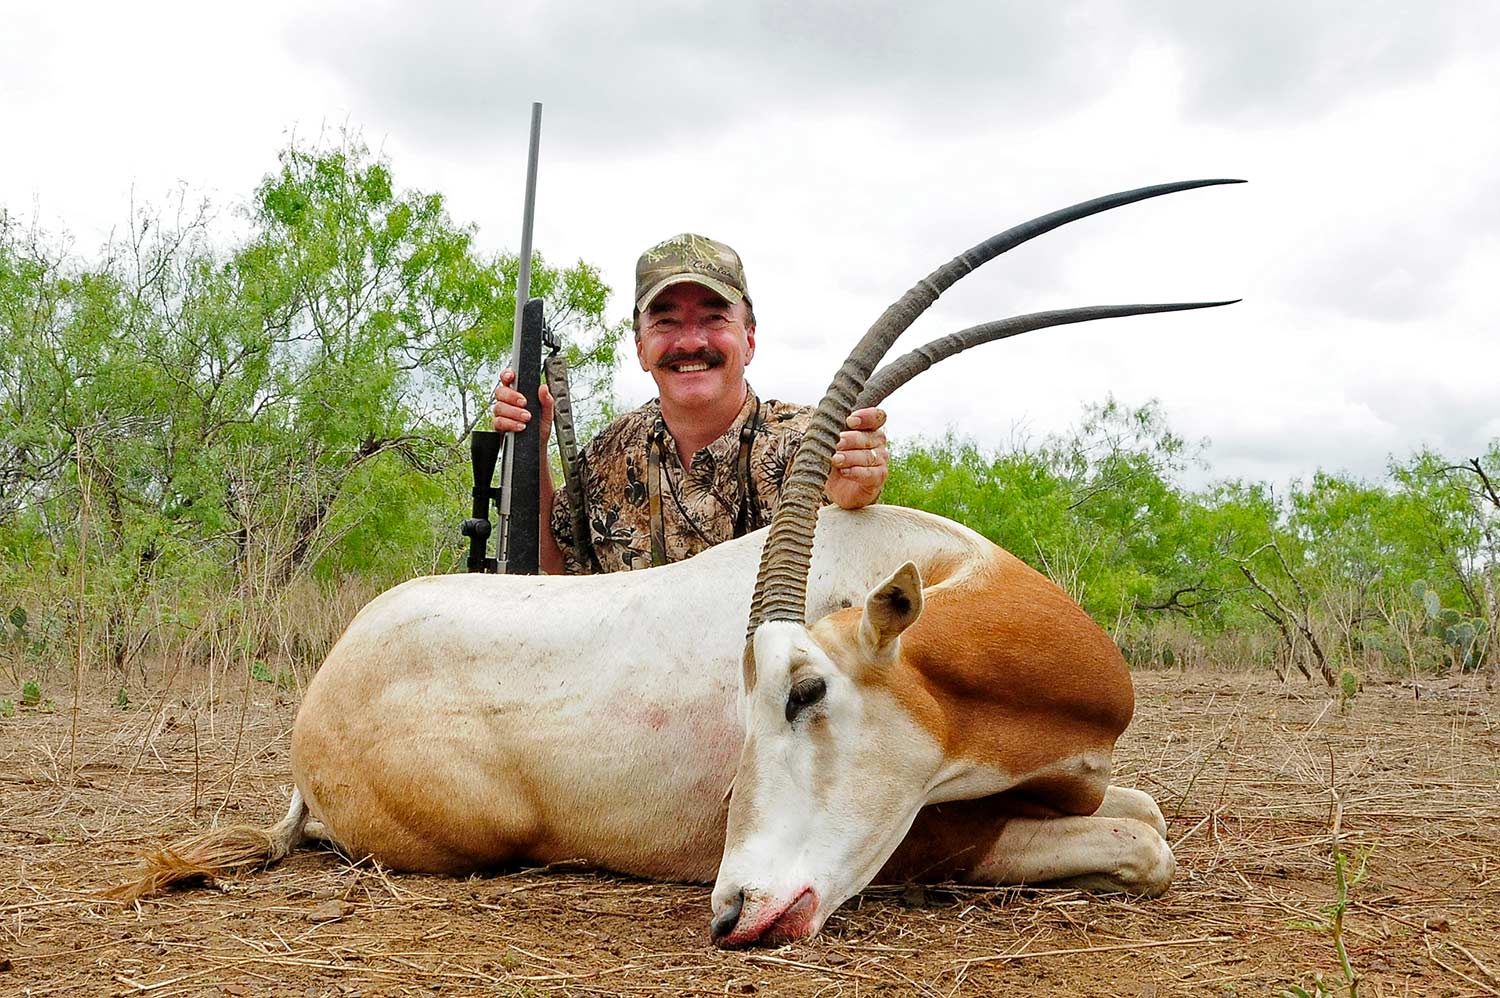 A hunter kneels behind a downed oryx in an open field.